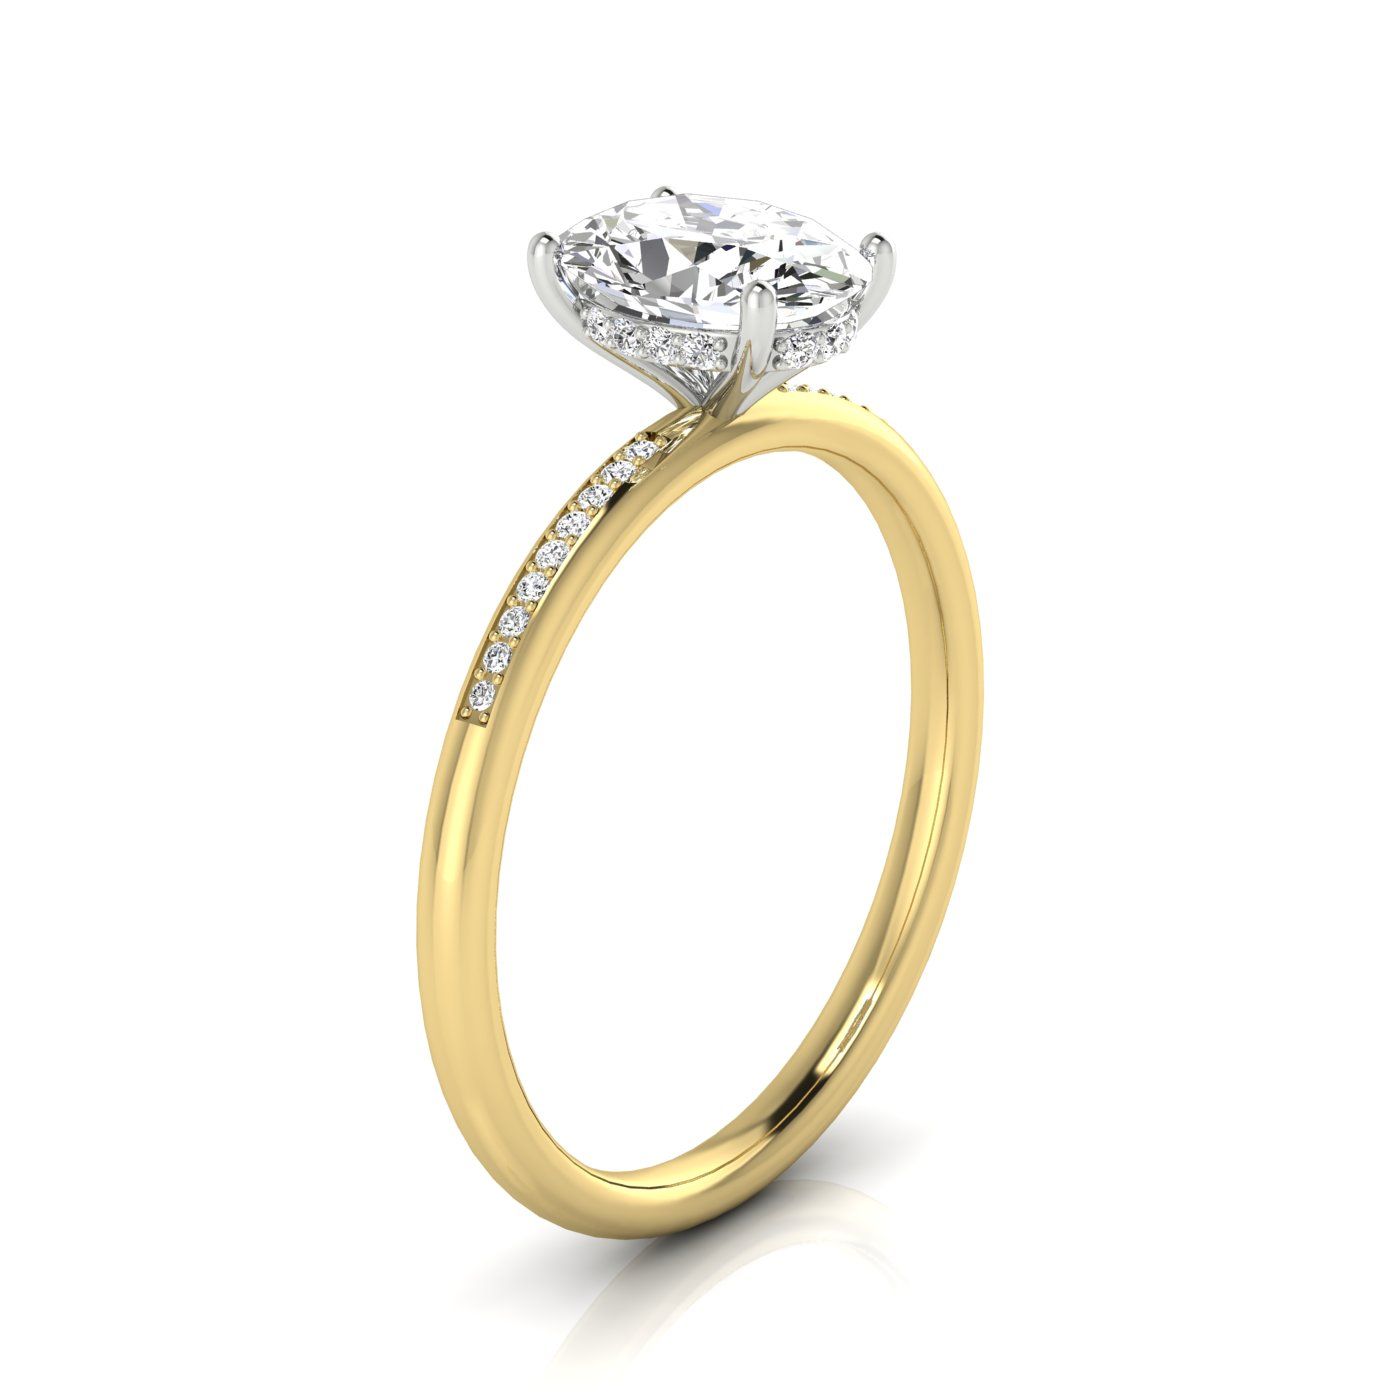 18ky Oval Engagement Ring With High Hidden Halo With 30 Prong Set Round Diamonds